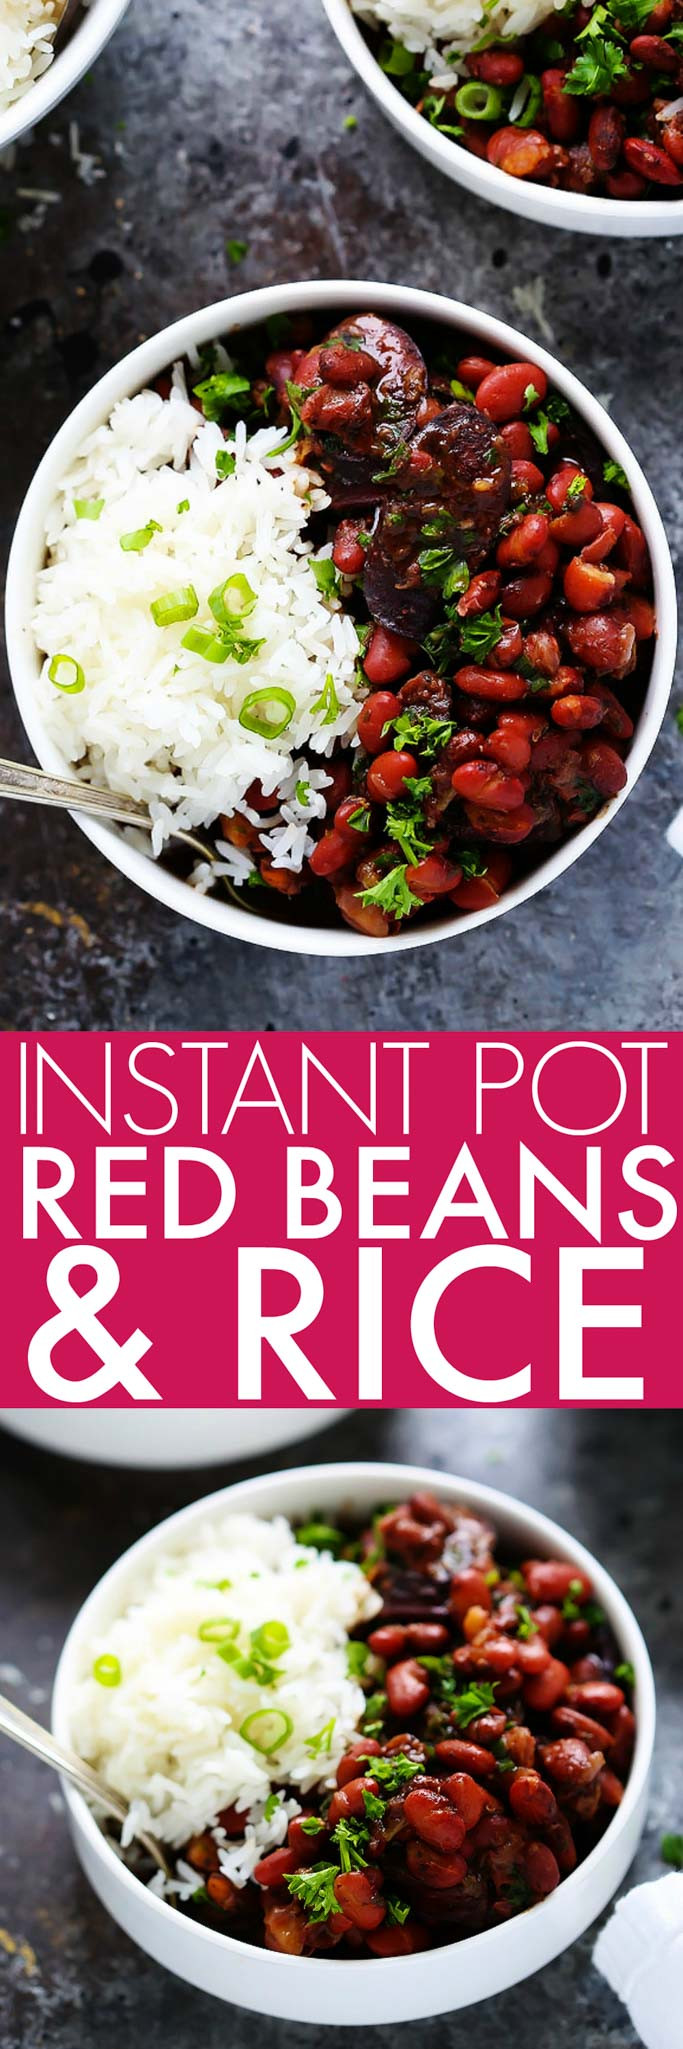 Red Beans And Rice With Canned Beans
 Instant Pot Red Beans & Rice